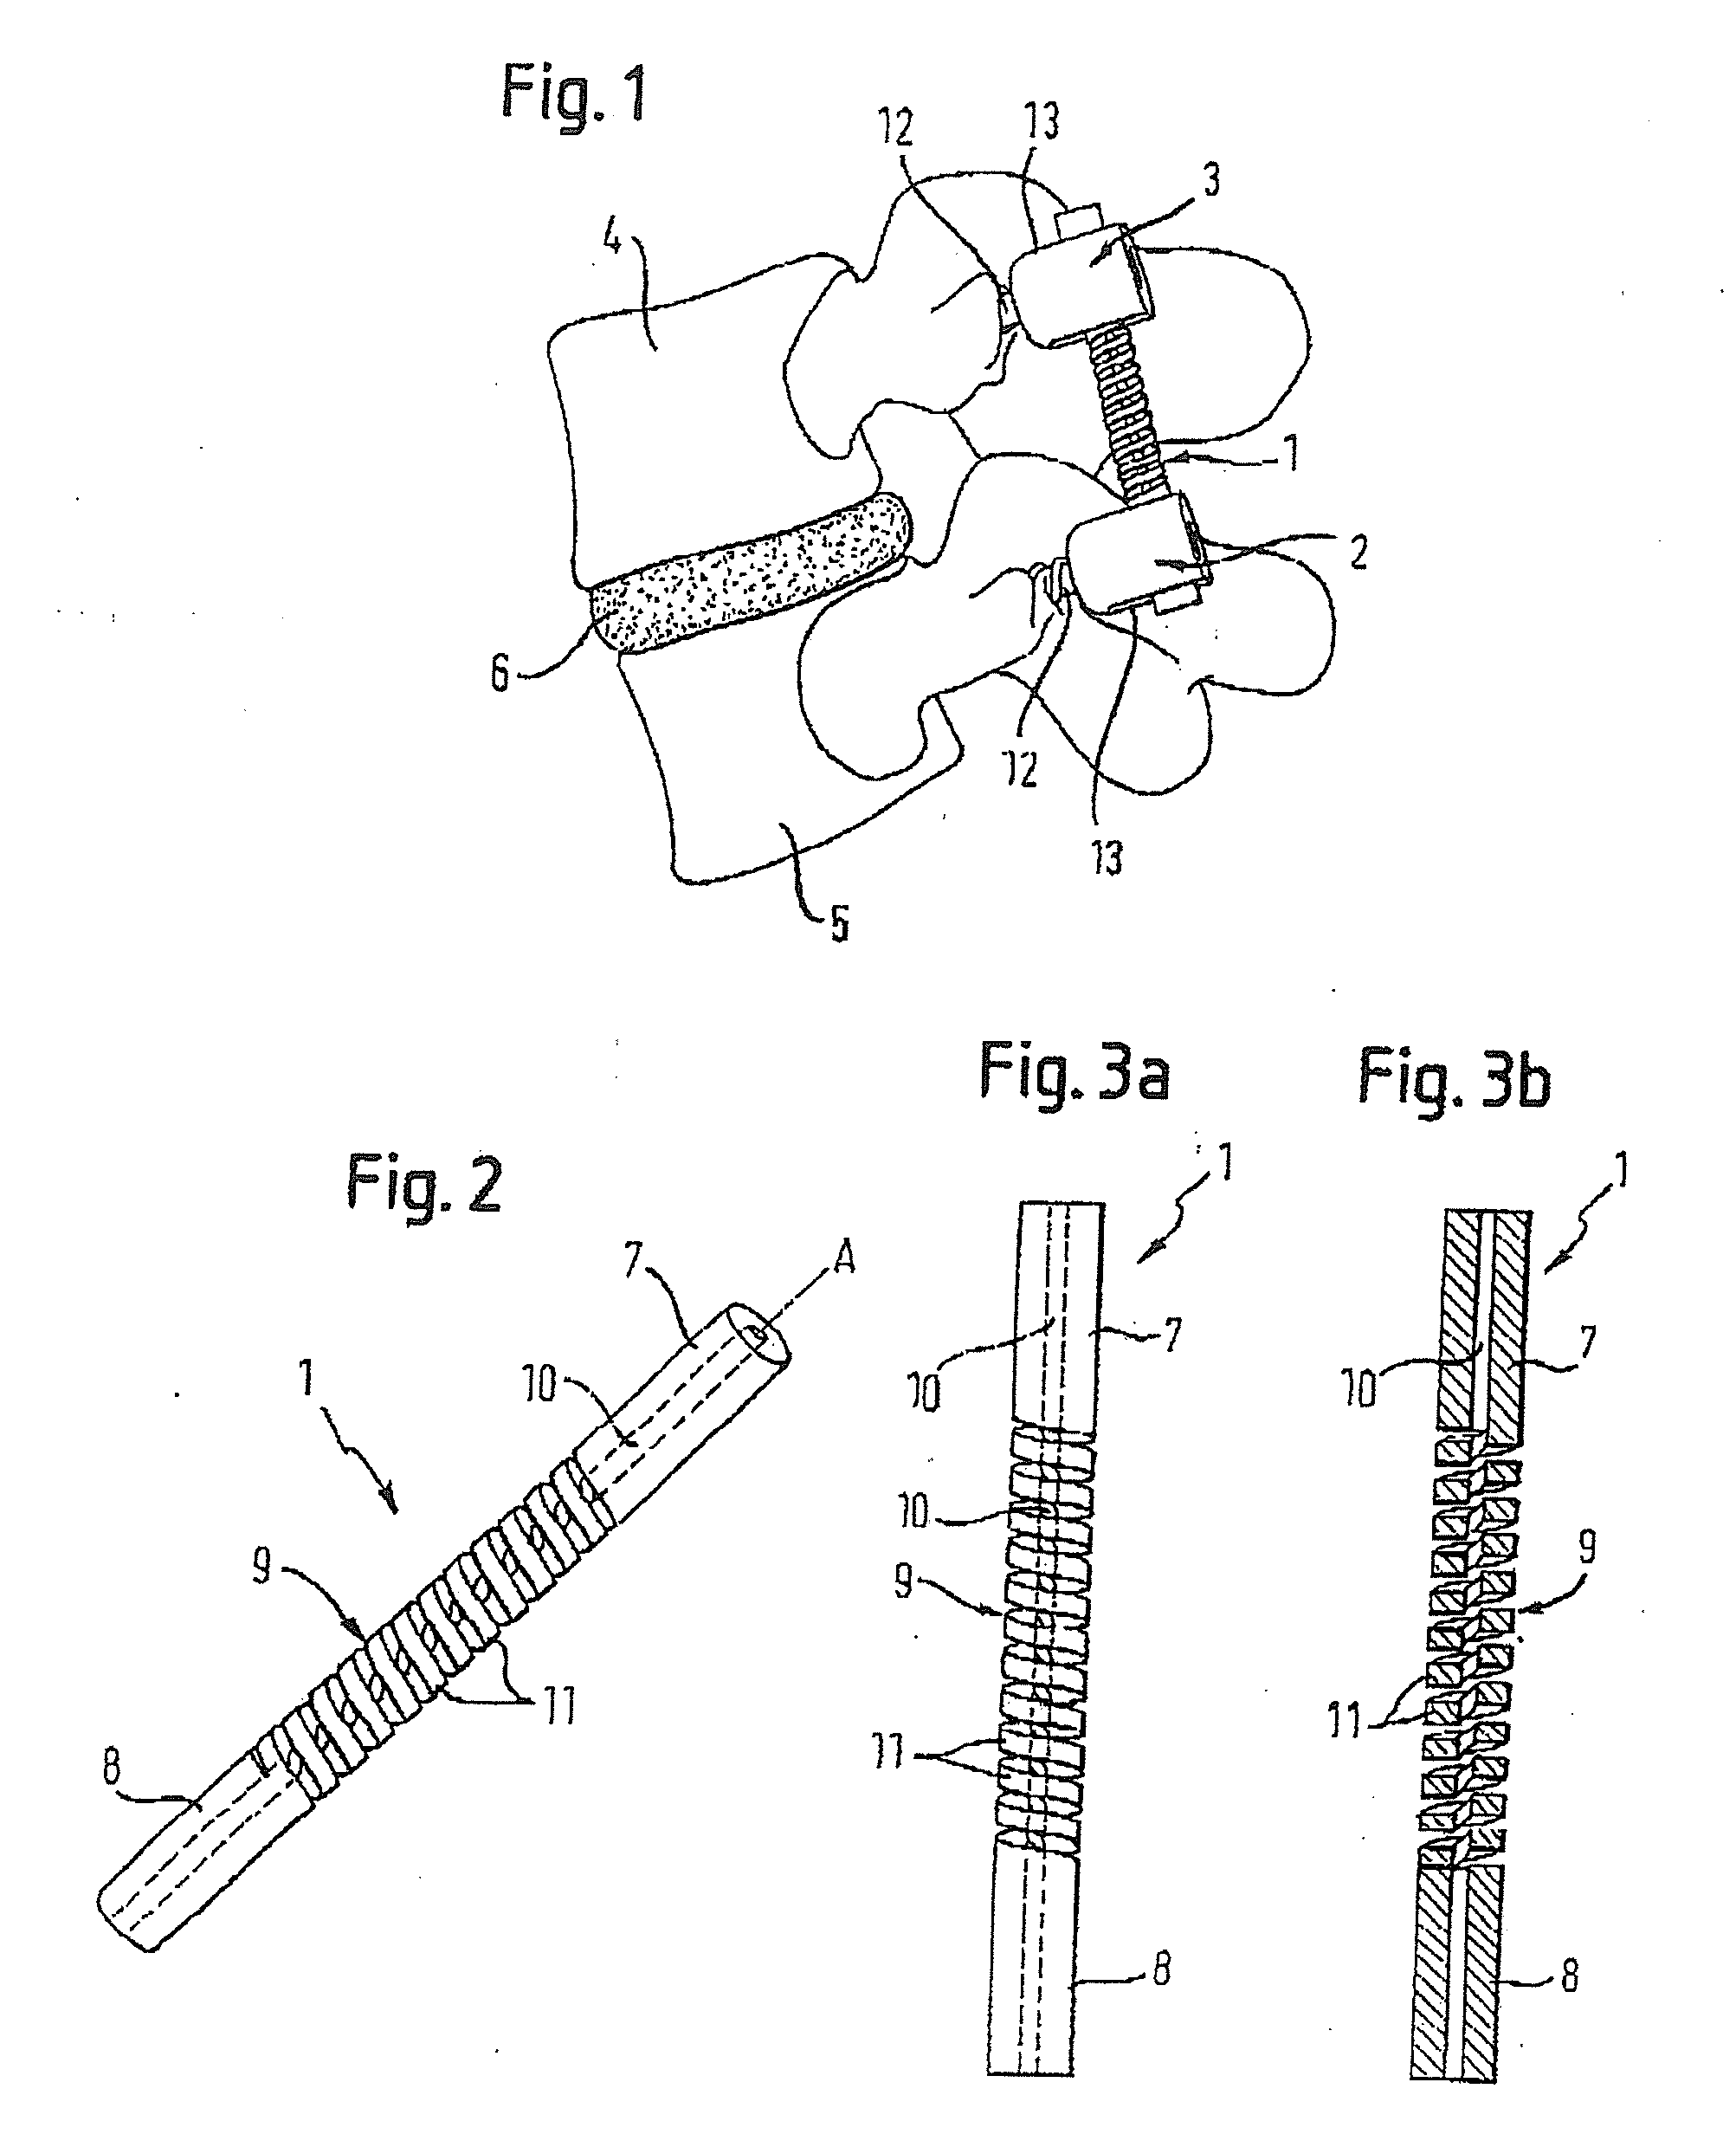 Rod-shaped implant element with flexible section